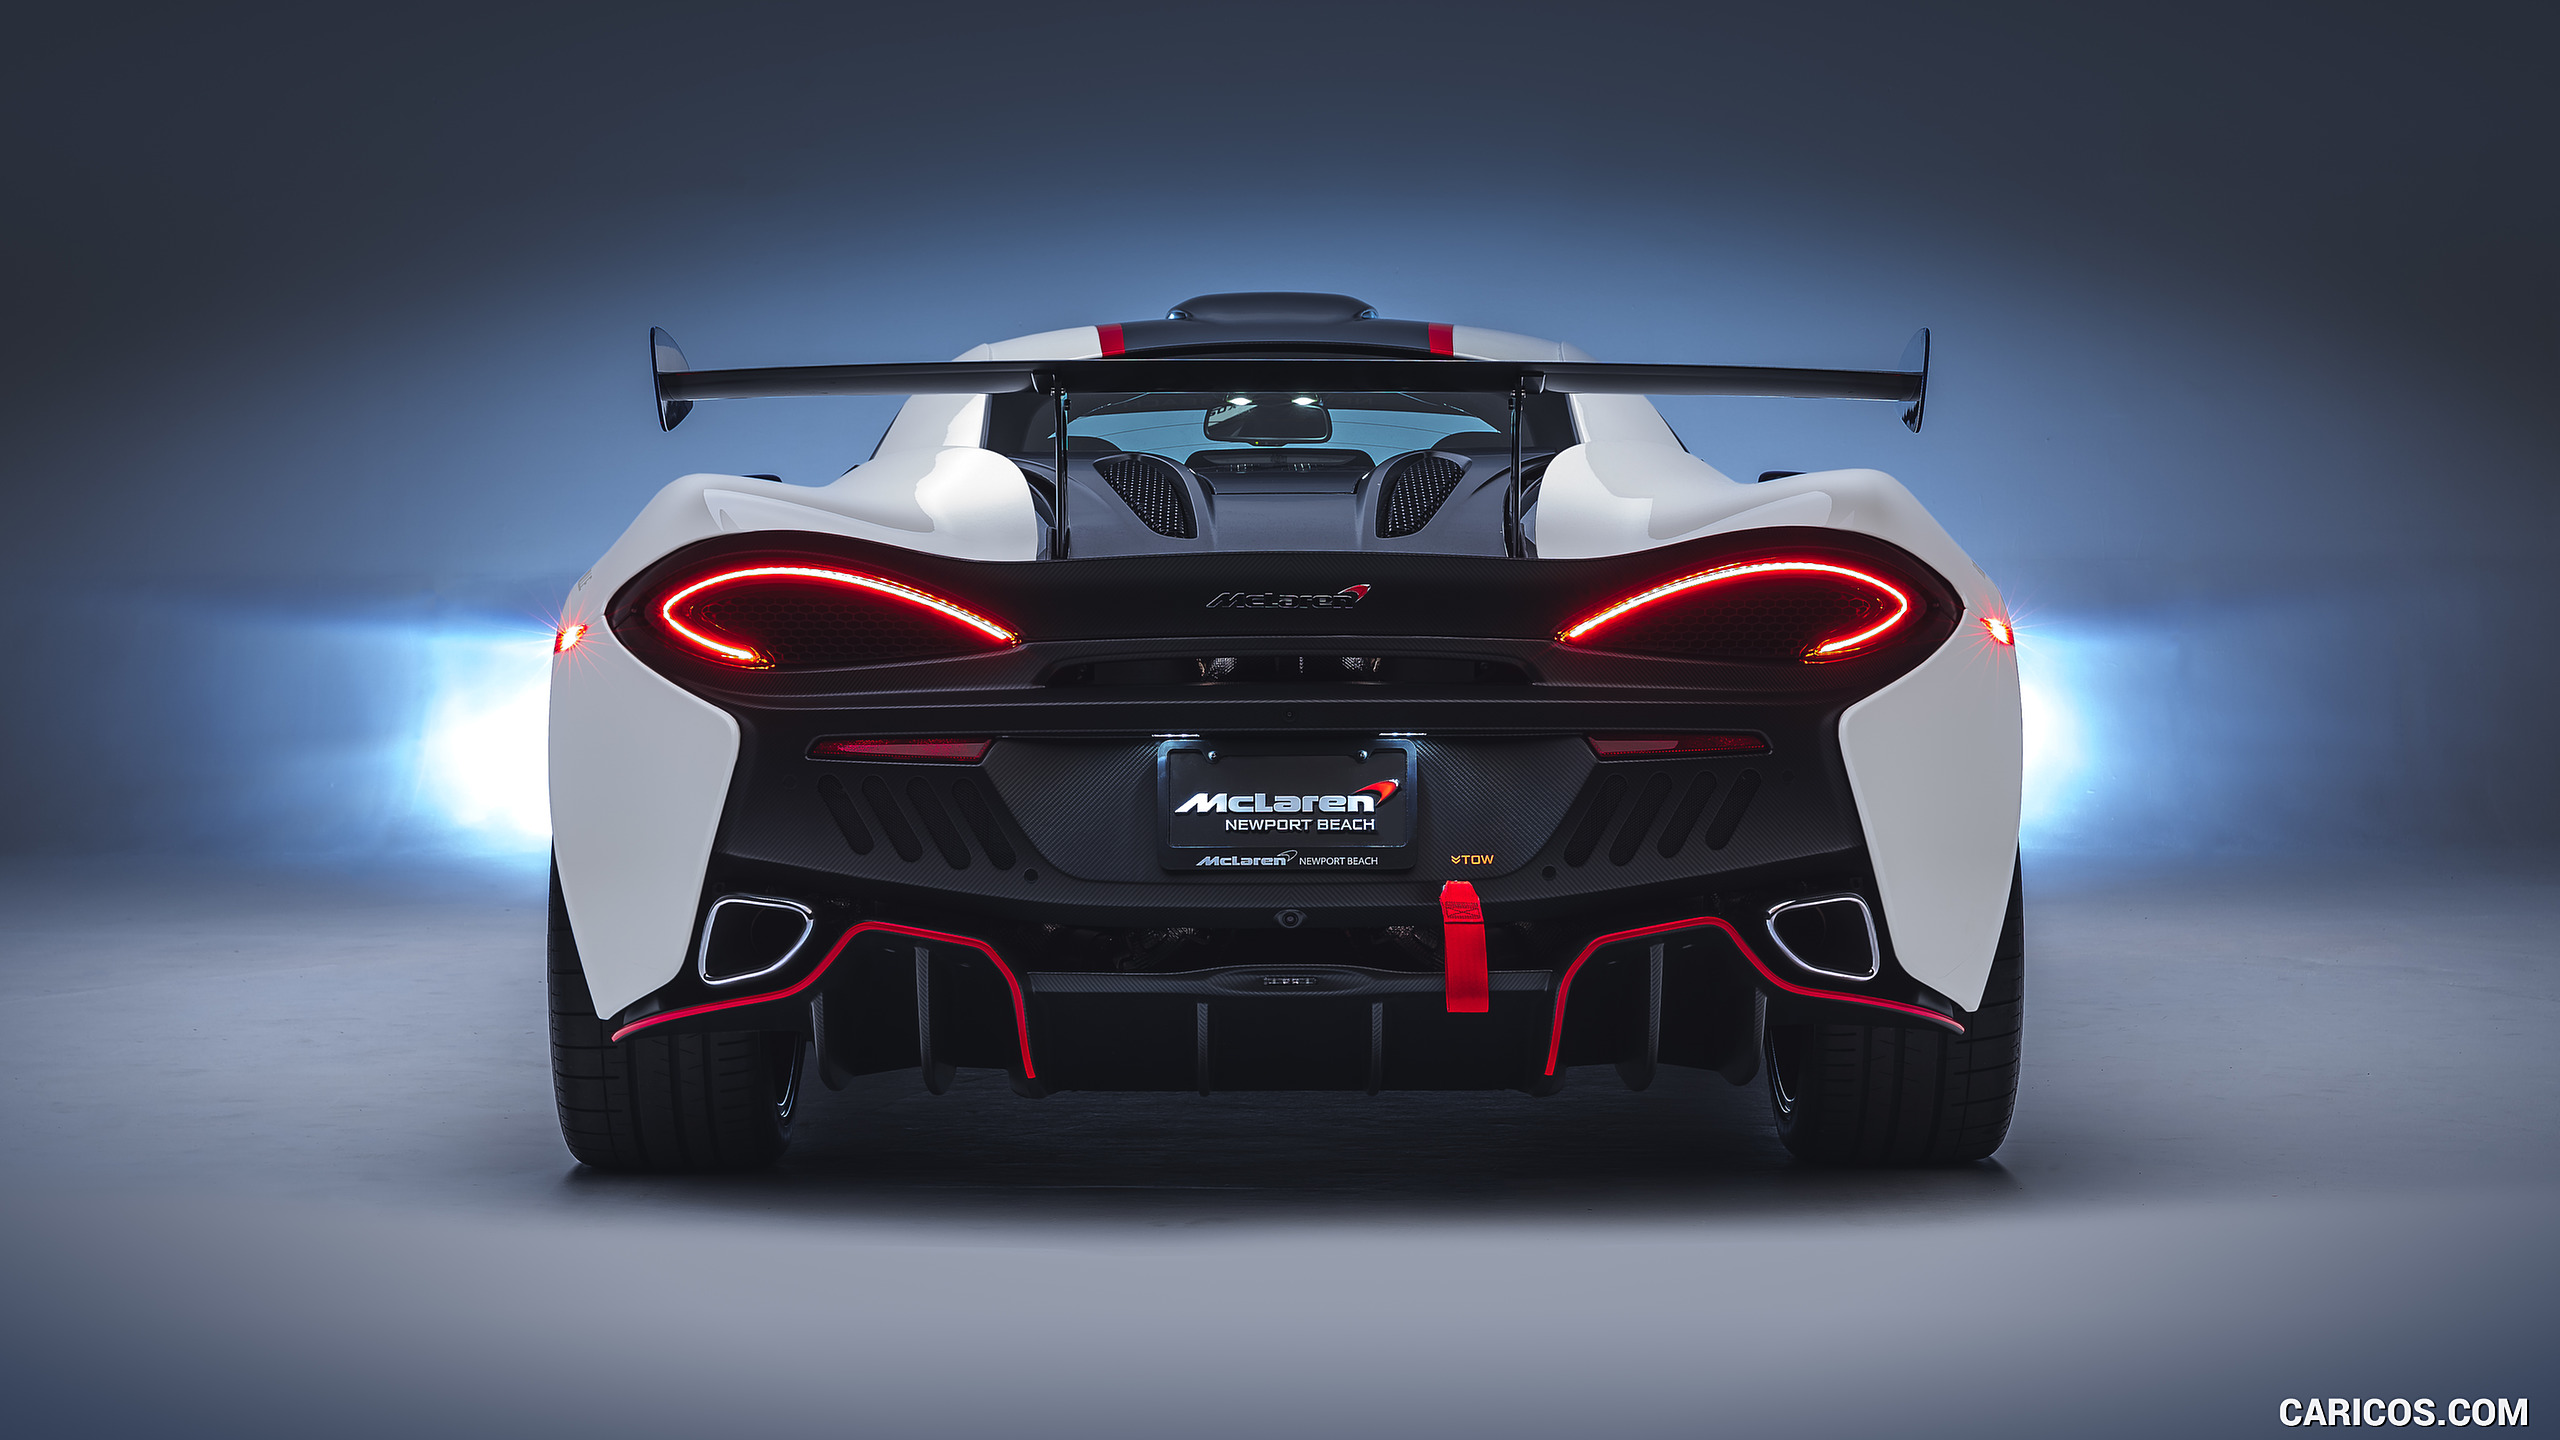 2018 McLaren 570S GT4 MSO X No. 8 White Red And Blue Accents - Rear, #4 of 22